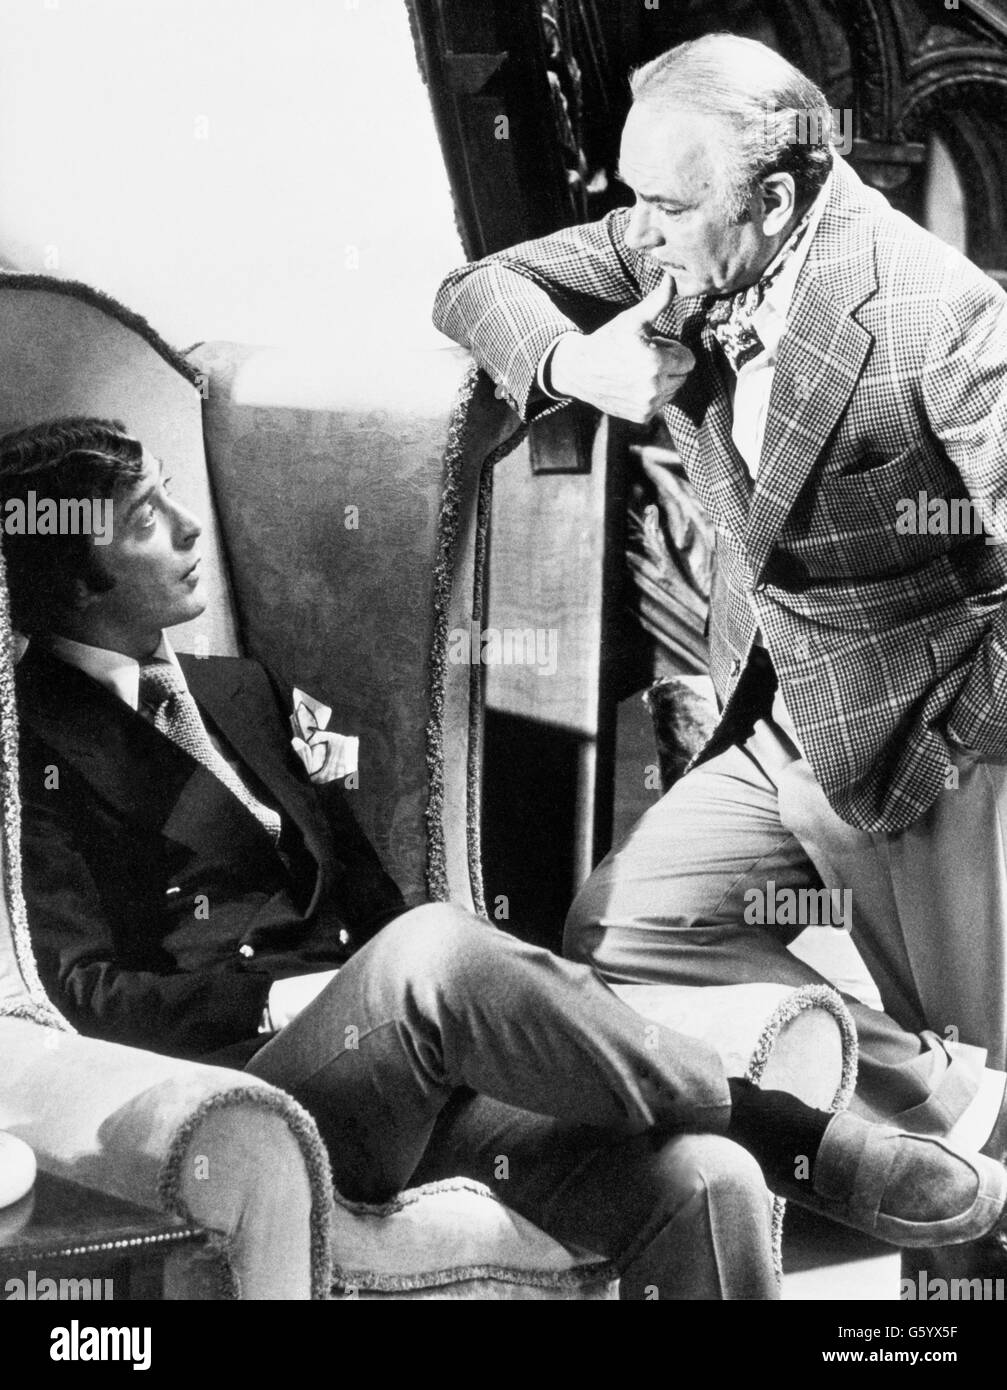 Actors Michael Caine and Laurence Olivier, who star in Sleuth, a film version of Anthony Shaffer's hit play, rehearse a scene at Pinewood Studios. Sleuth is being directed by Joseph L. Mankiewicz and produced by Morton Gottlieb for release by 20th Century Fox. Stock Photo